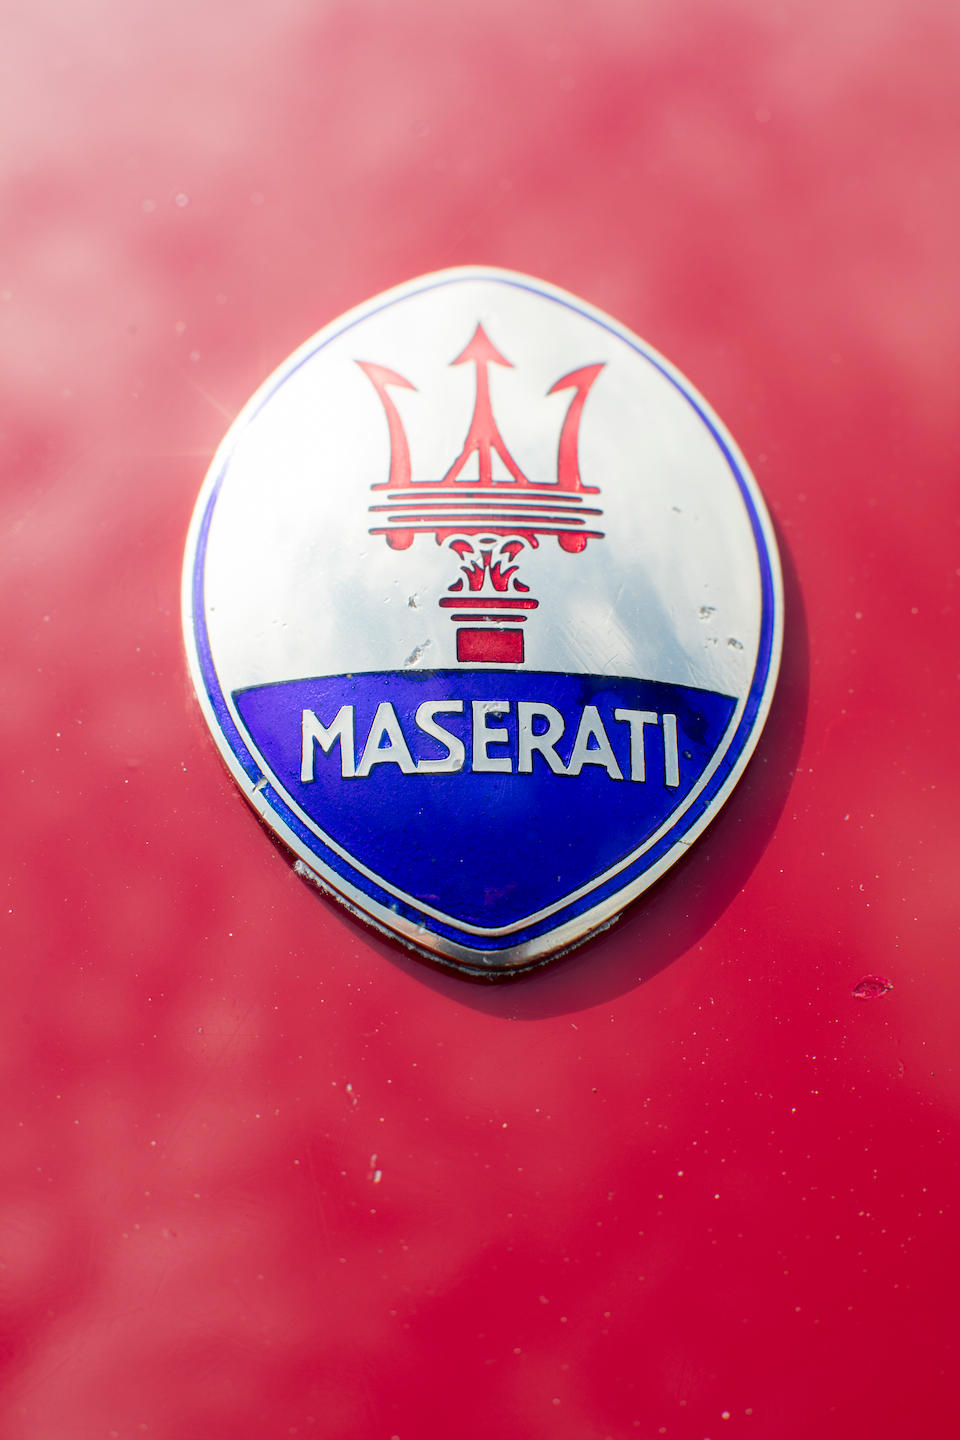 <B>1956 Maserati 300S SPORTS RACING TWO SEATER</B><br />Chassis no. 3069<br />Engine no. 3058 (see text)